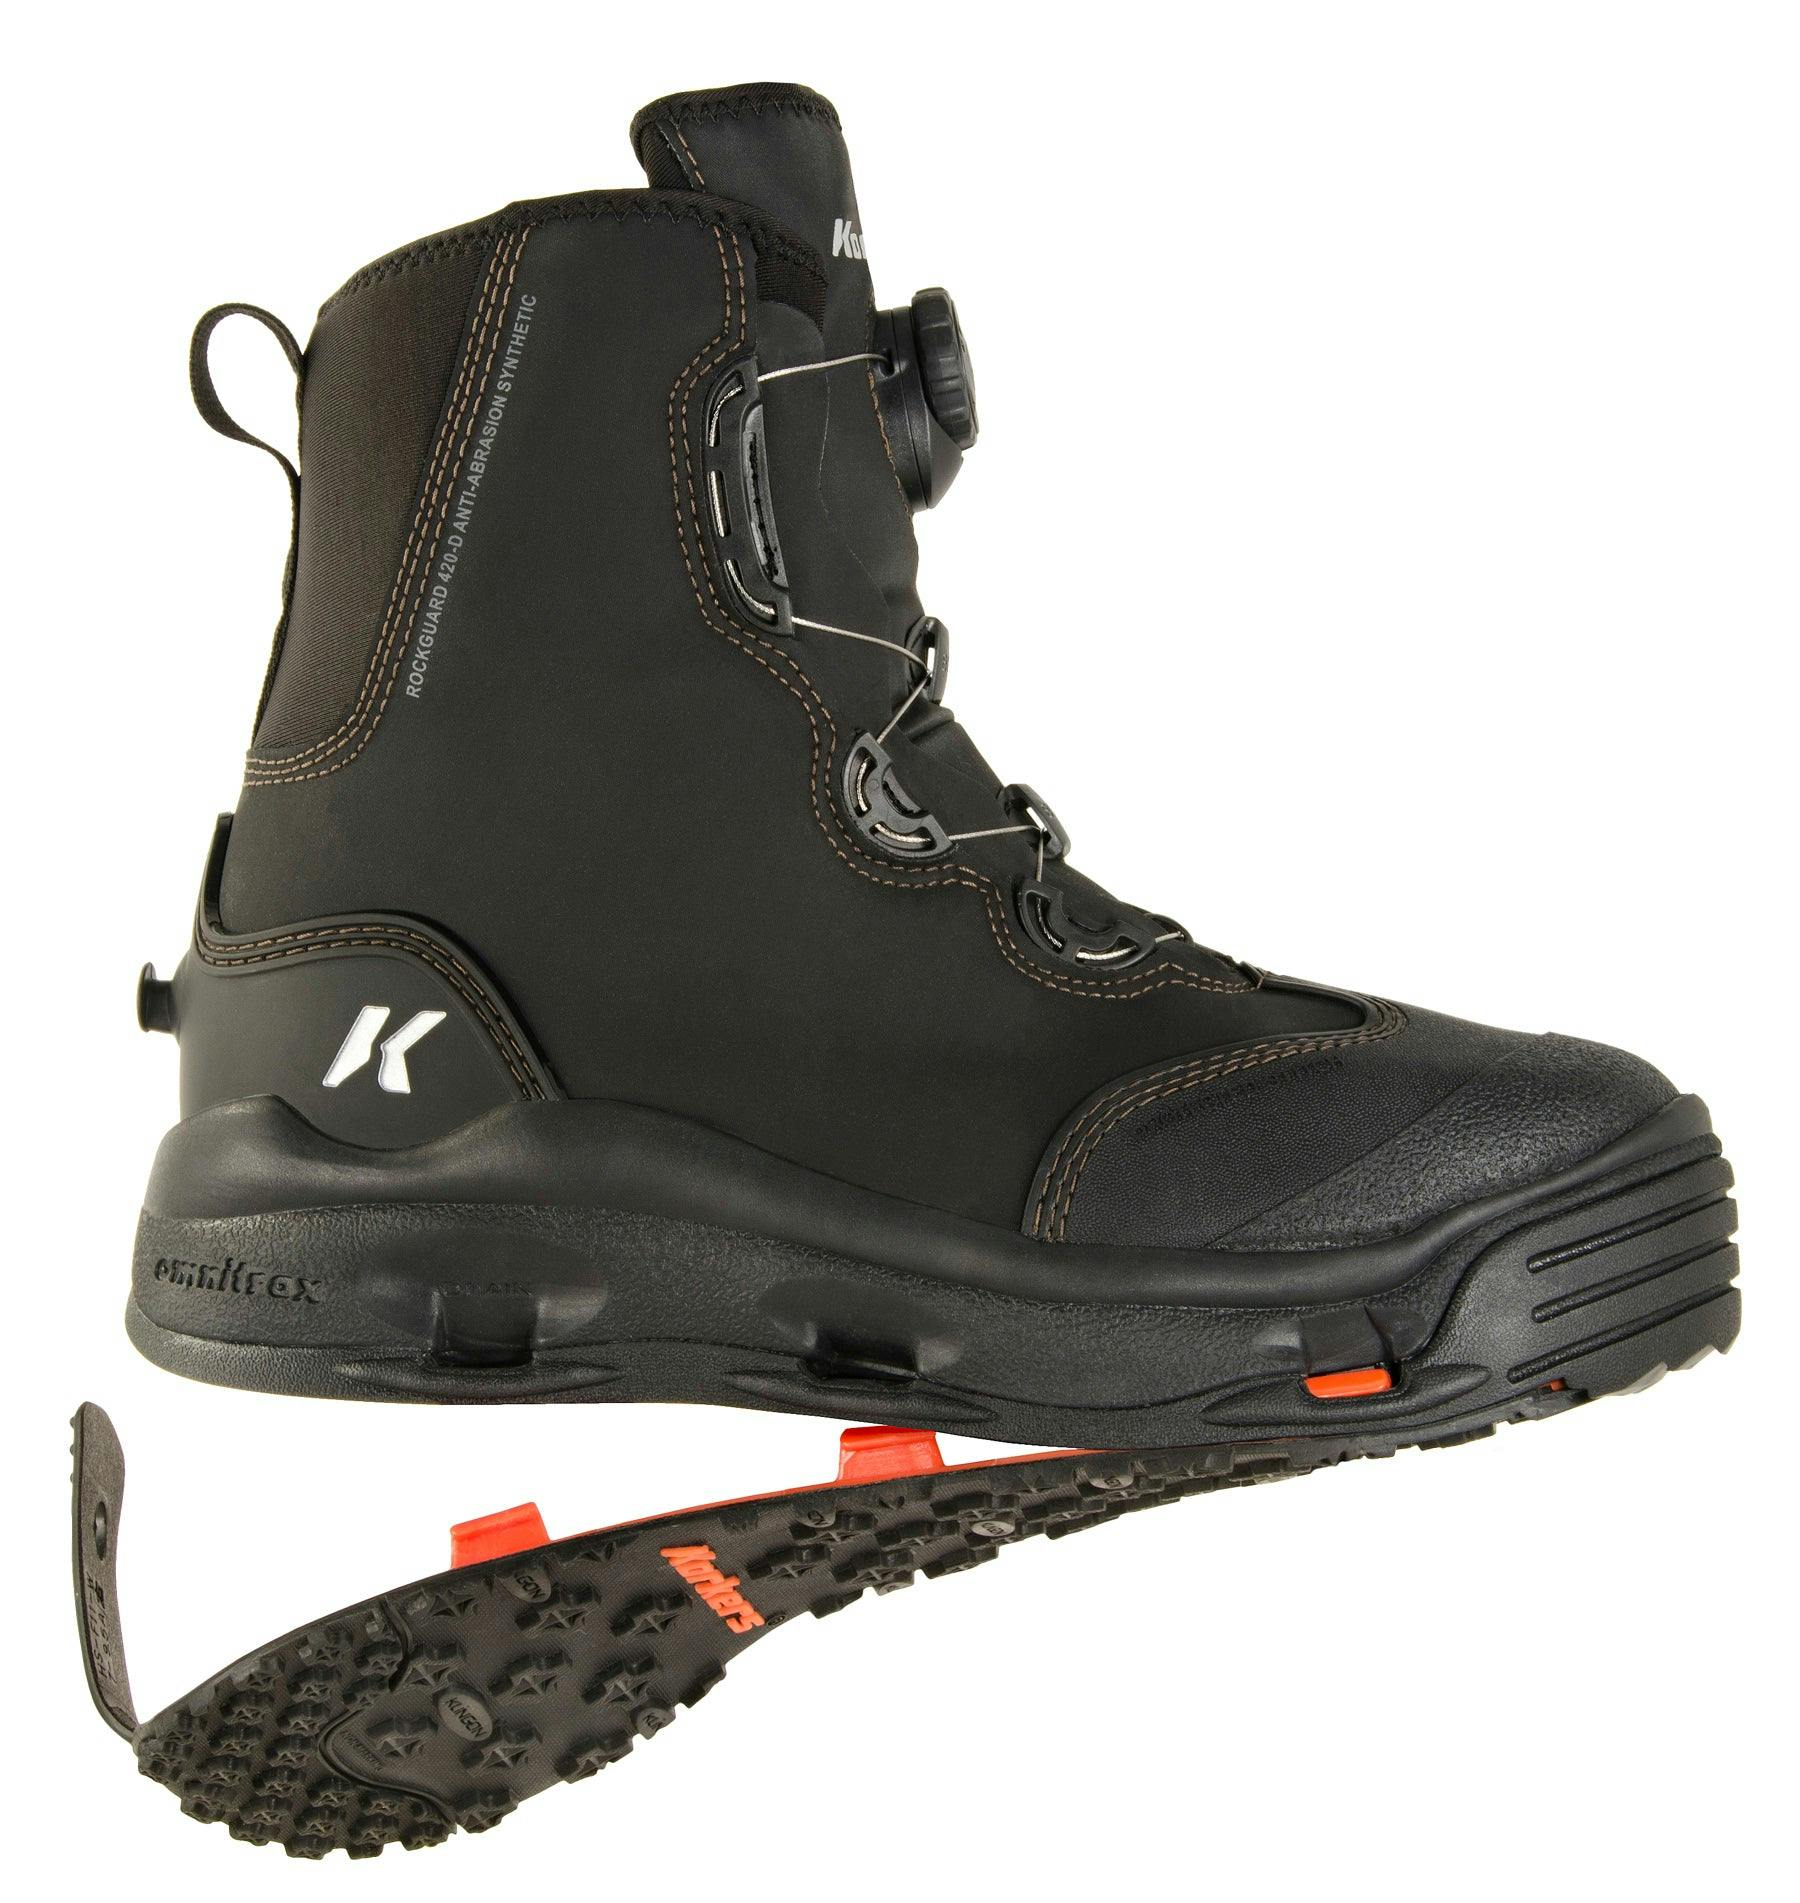 Korkers Devils Canyon Boot